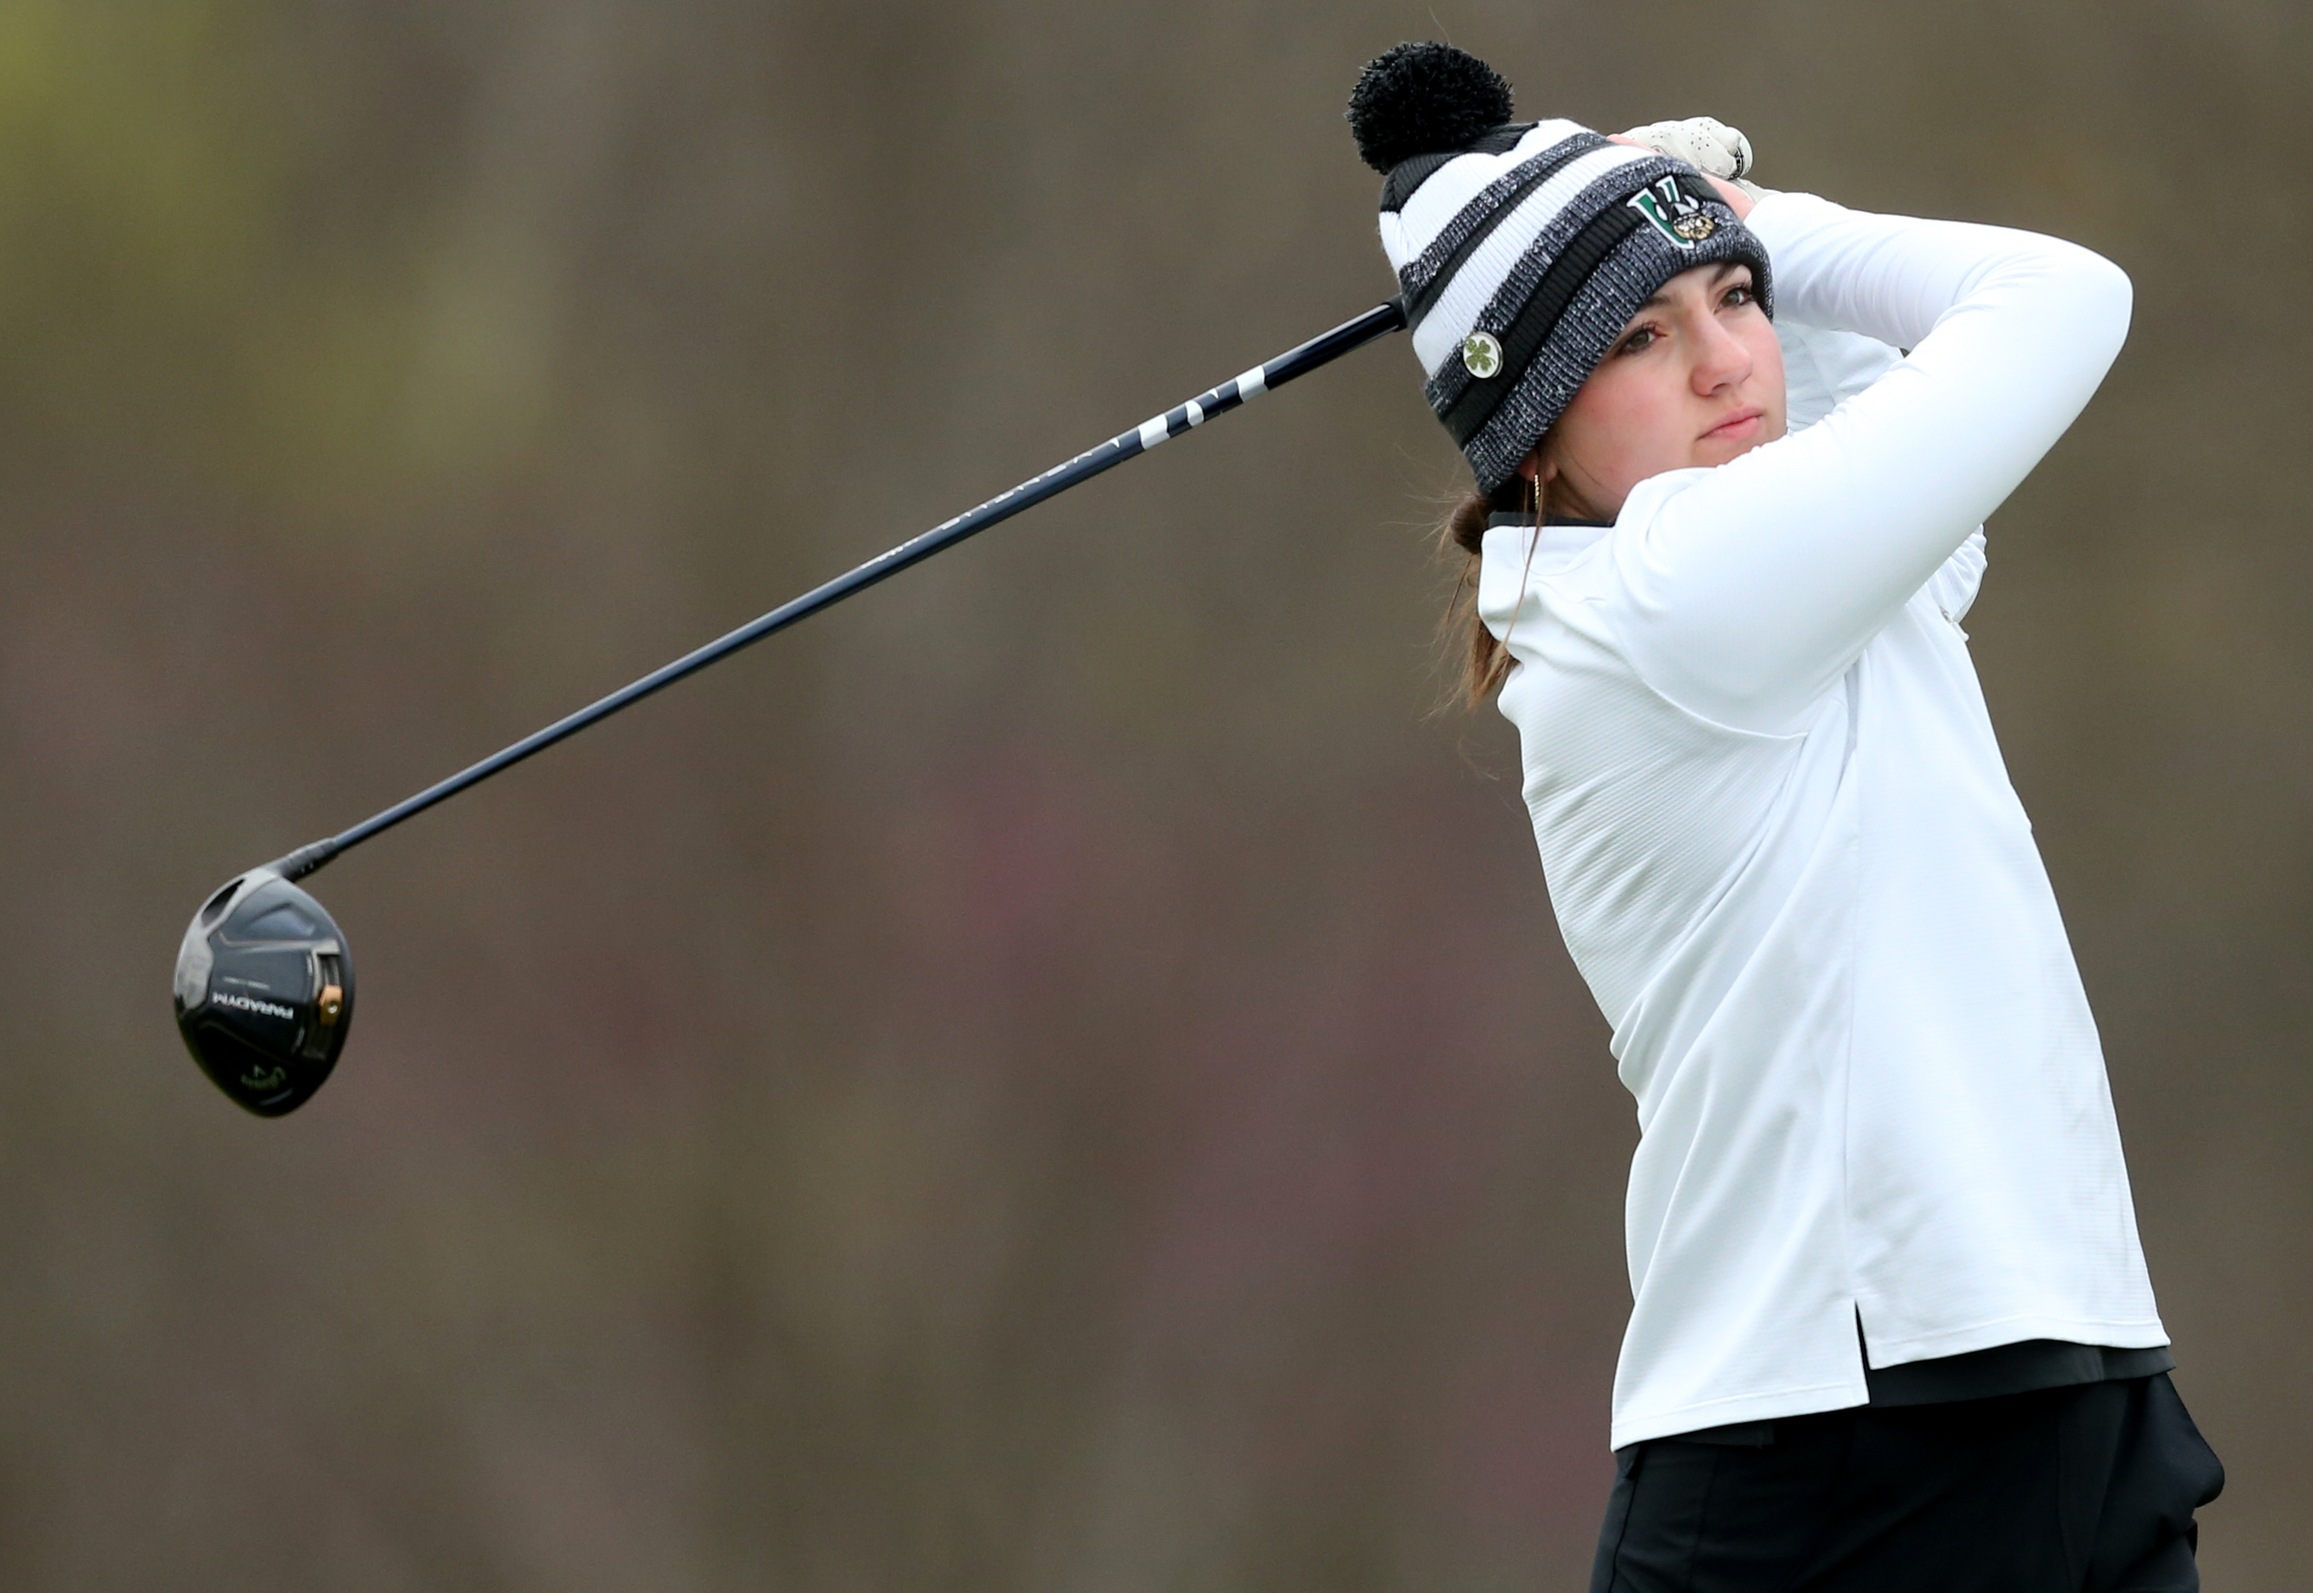 Two Vikings in Top Five, Cleveland State Women’s Golf Seventh after Day One of Julie Invitational